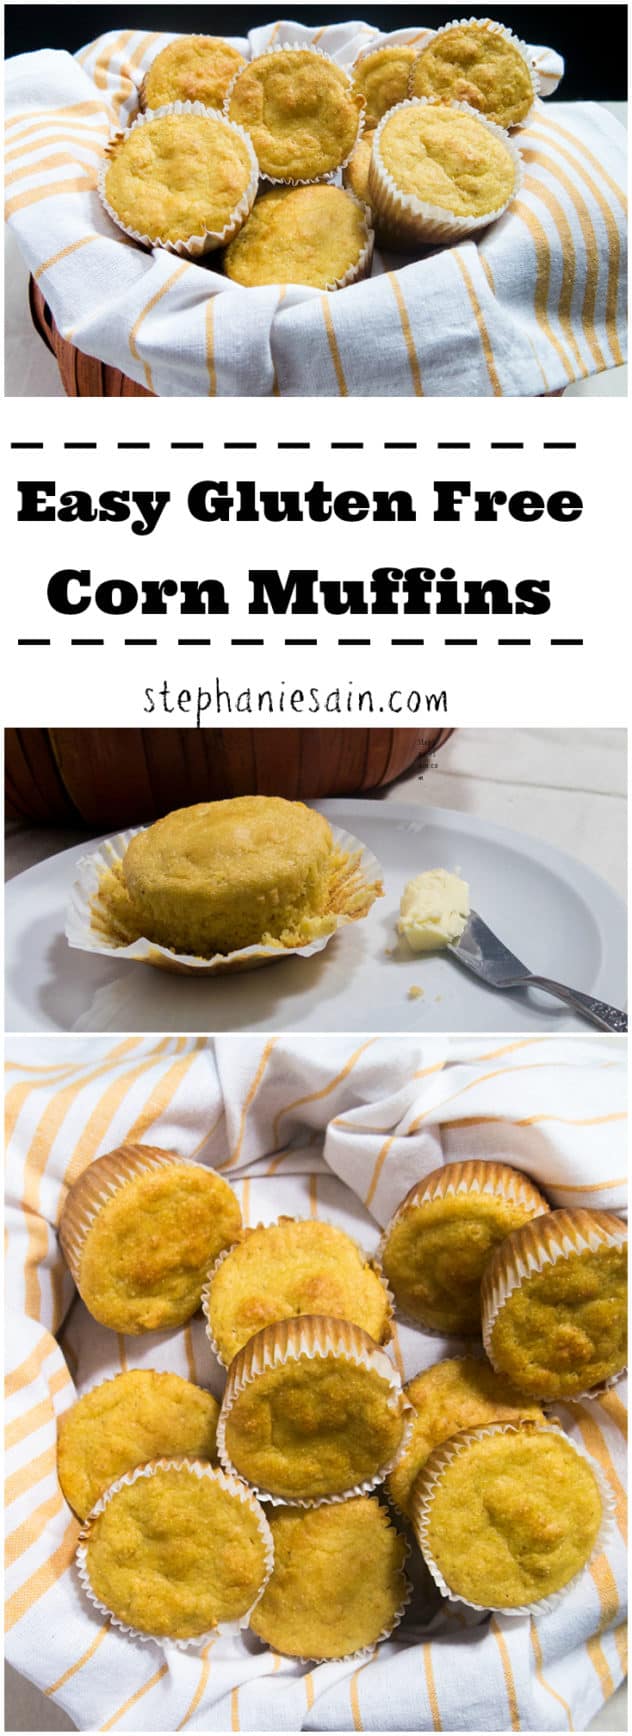 Easy Gluten Free Corn Muffins are a tasty, healthy muffin that go perfect with soups, stews or chili. Vegetarian and Gluten Free.